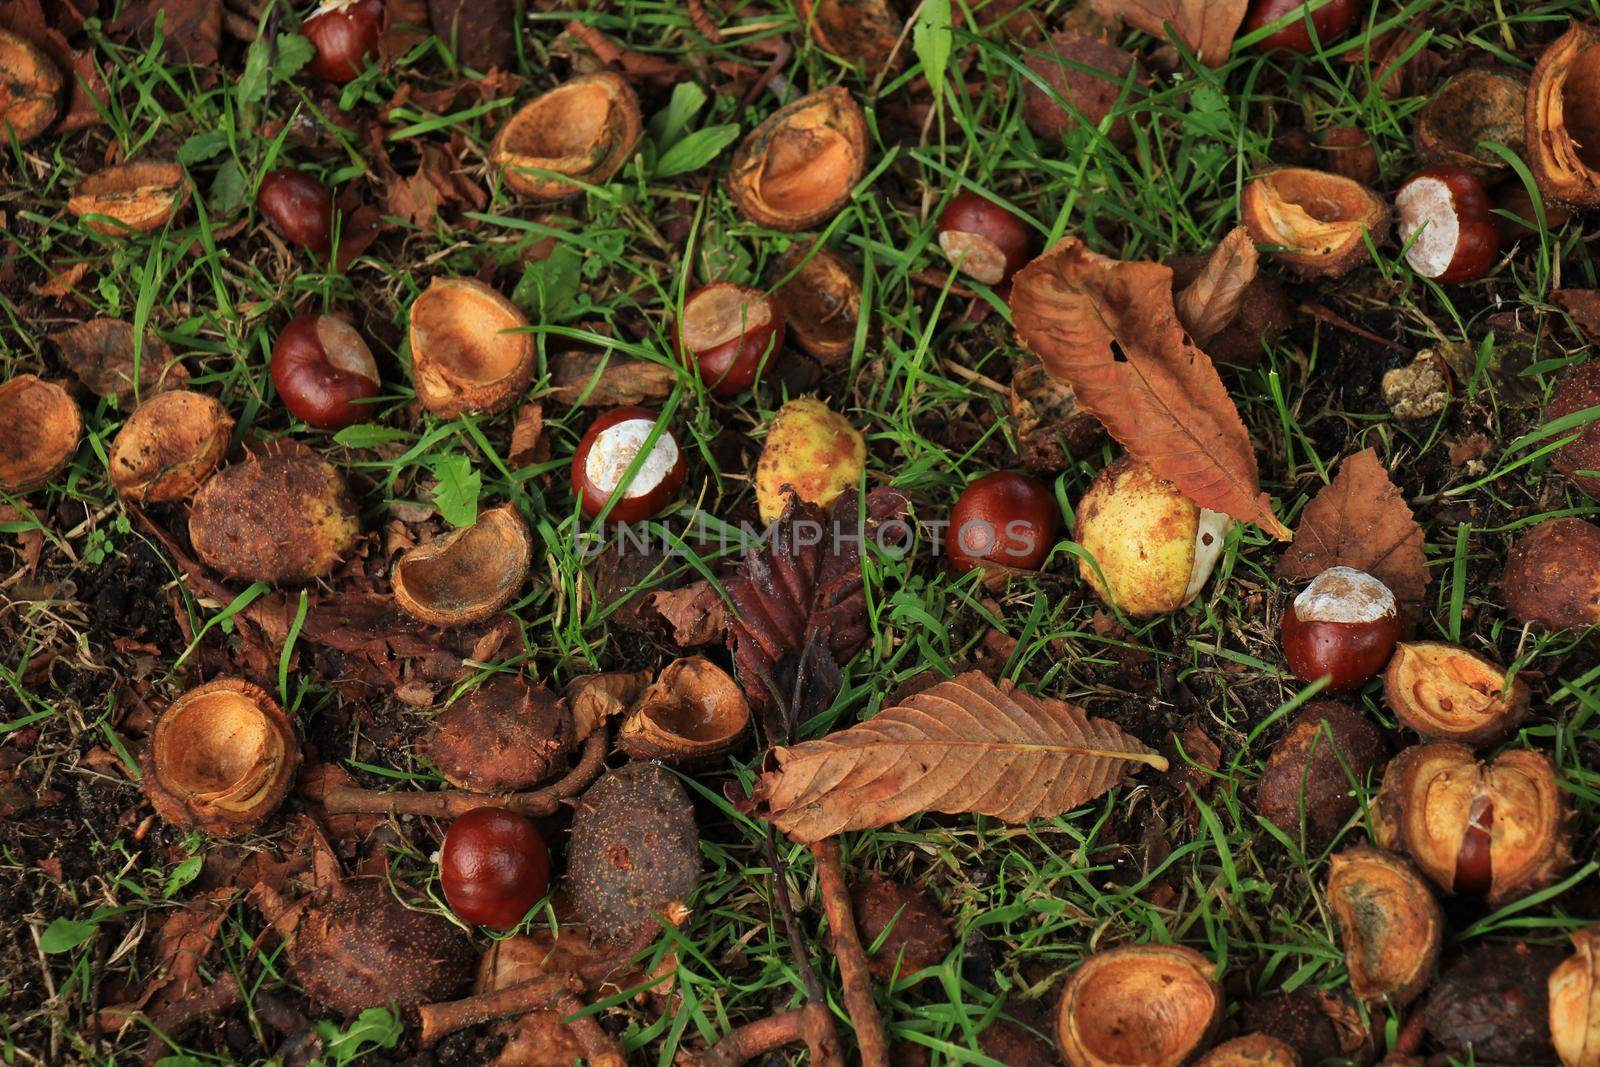 Chestnuts in the grass in an autumn forest